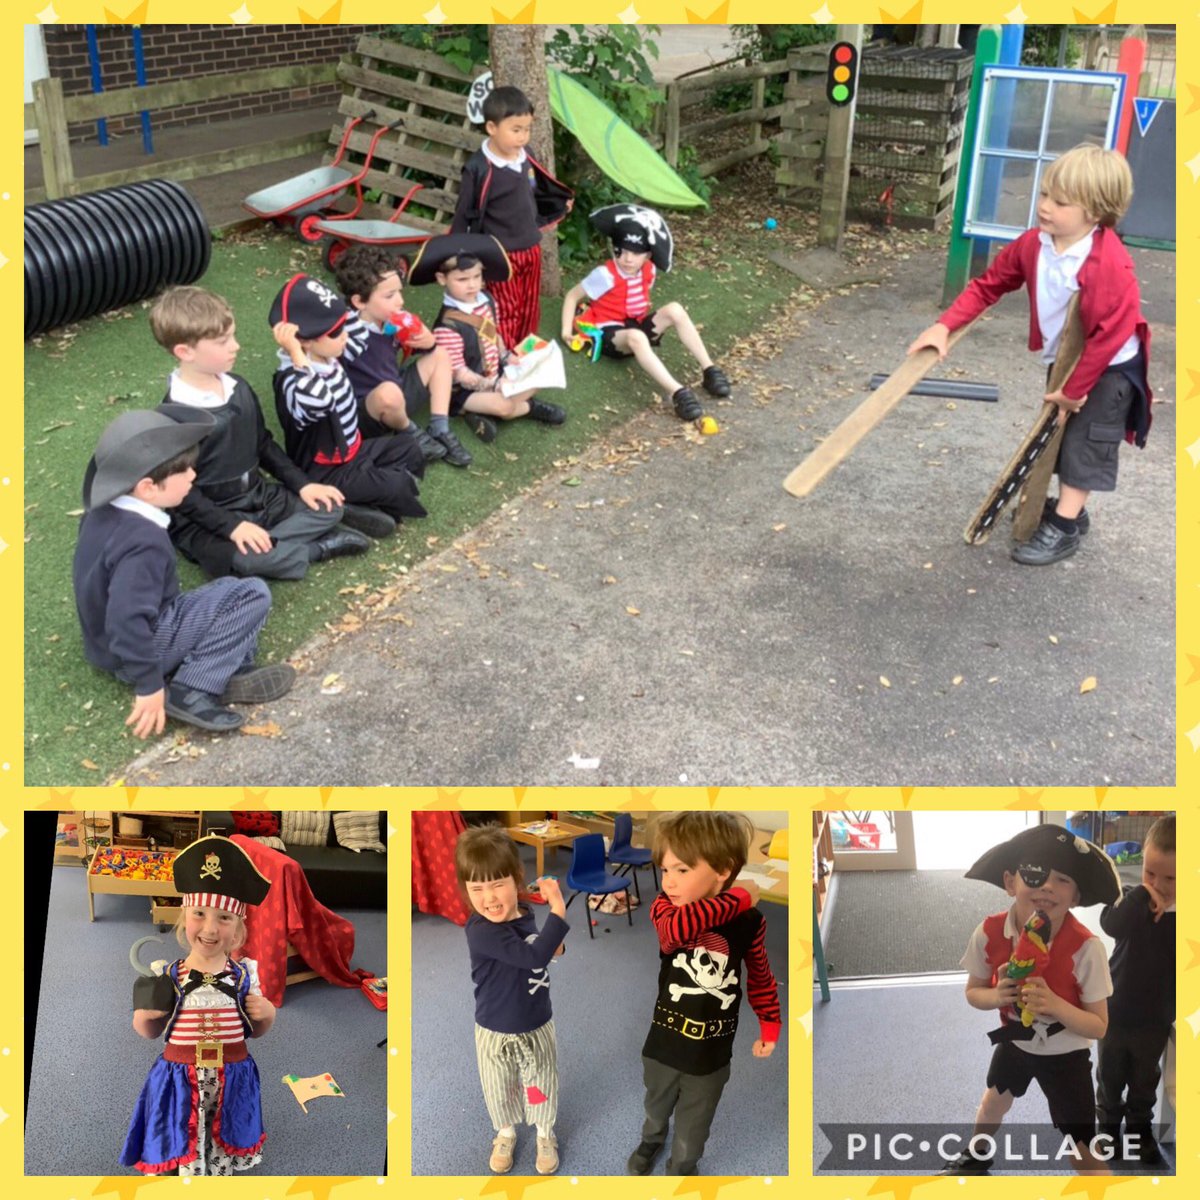 Yo ho ho! Our EYFS pirates had a fun time at their pirate party this afternoon. Good job they had planned it all so well last week! #writingforapurpose #readingfortreasure  🏴‍☠️👑🦜🏝⚓️👣🏴‍☠️🗺🧭